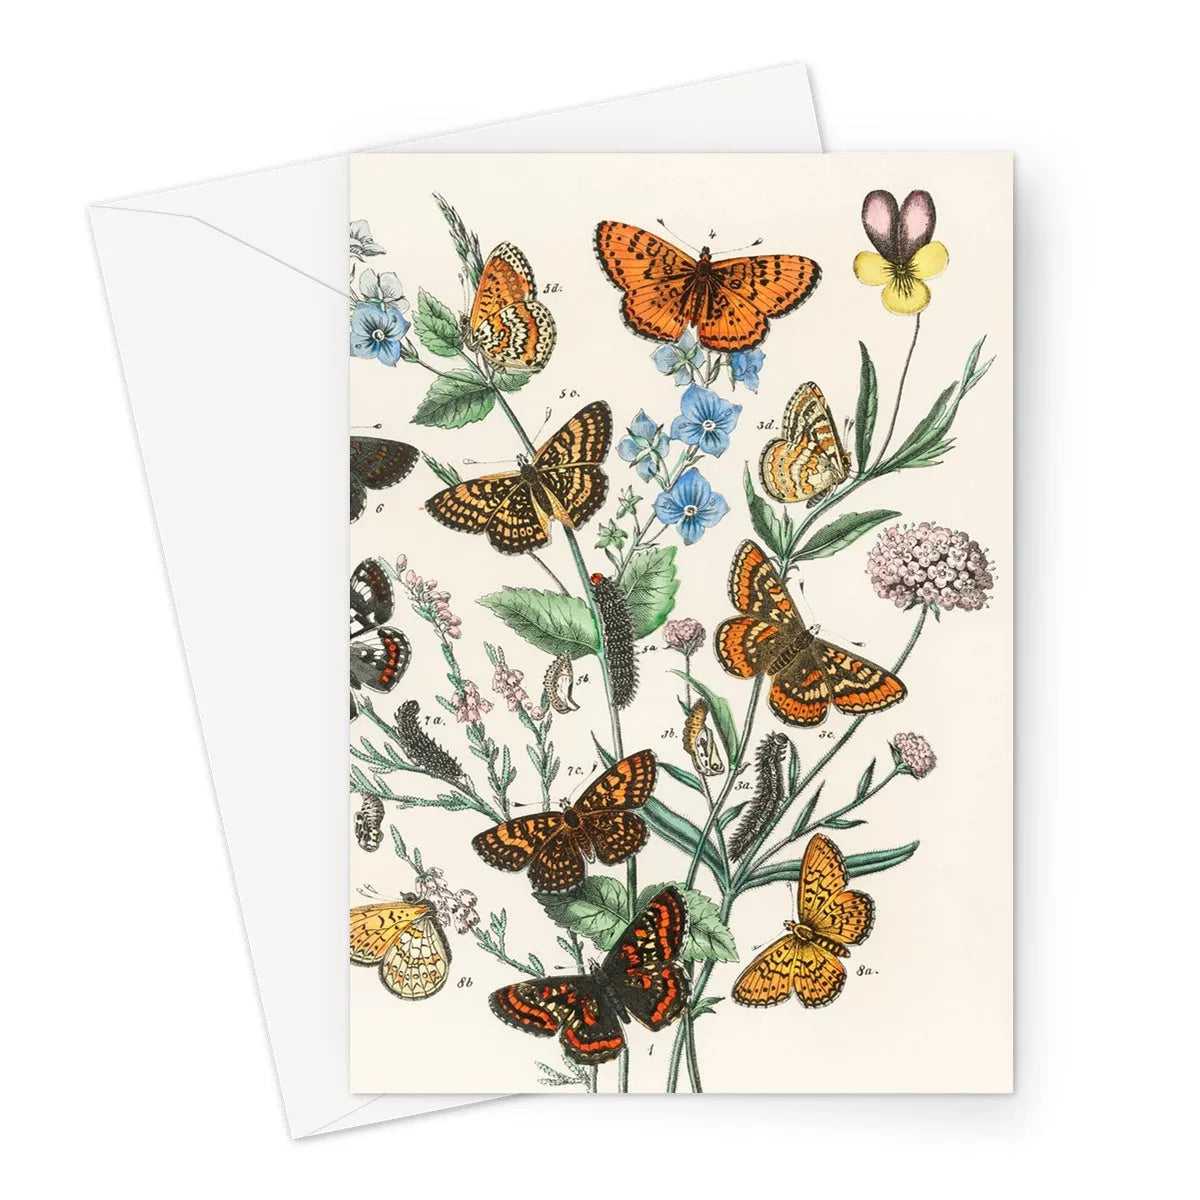 European Butterflies And Moths 2 By William Forsell Kirby Greeting Card - A5 Portrait / 1 Card - Notebooks & Notepads